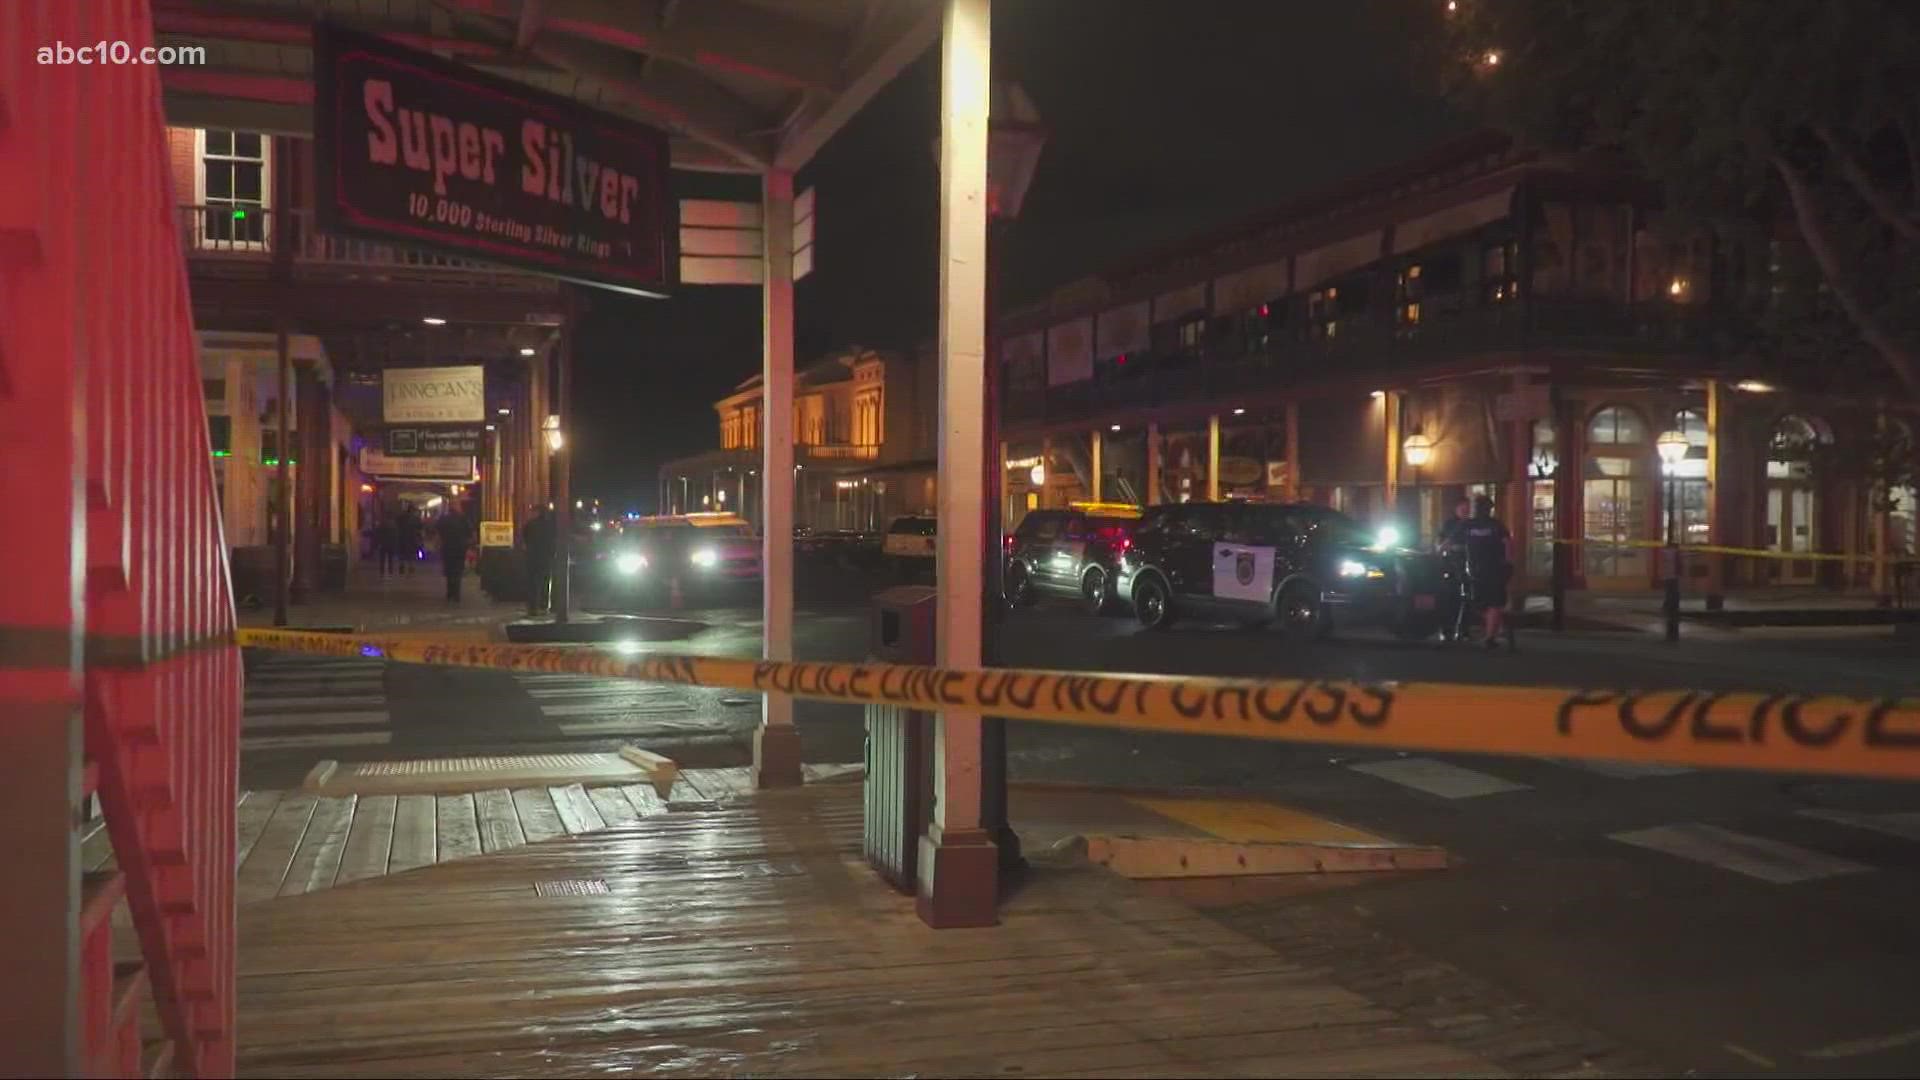 ABC10's Zach Fuentes at the scene of a shooting that happened in Old Sacramento on Sept. 27, 2021. Editor's note: the video originally said fatal, it's been updated.